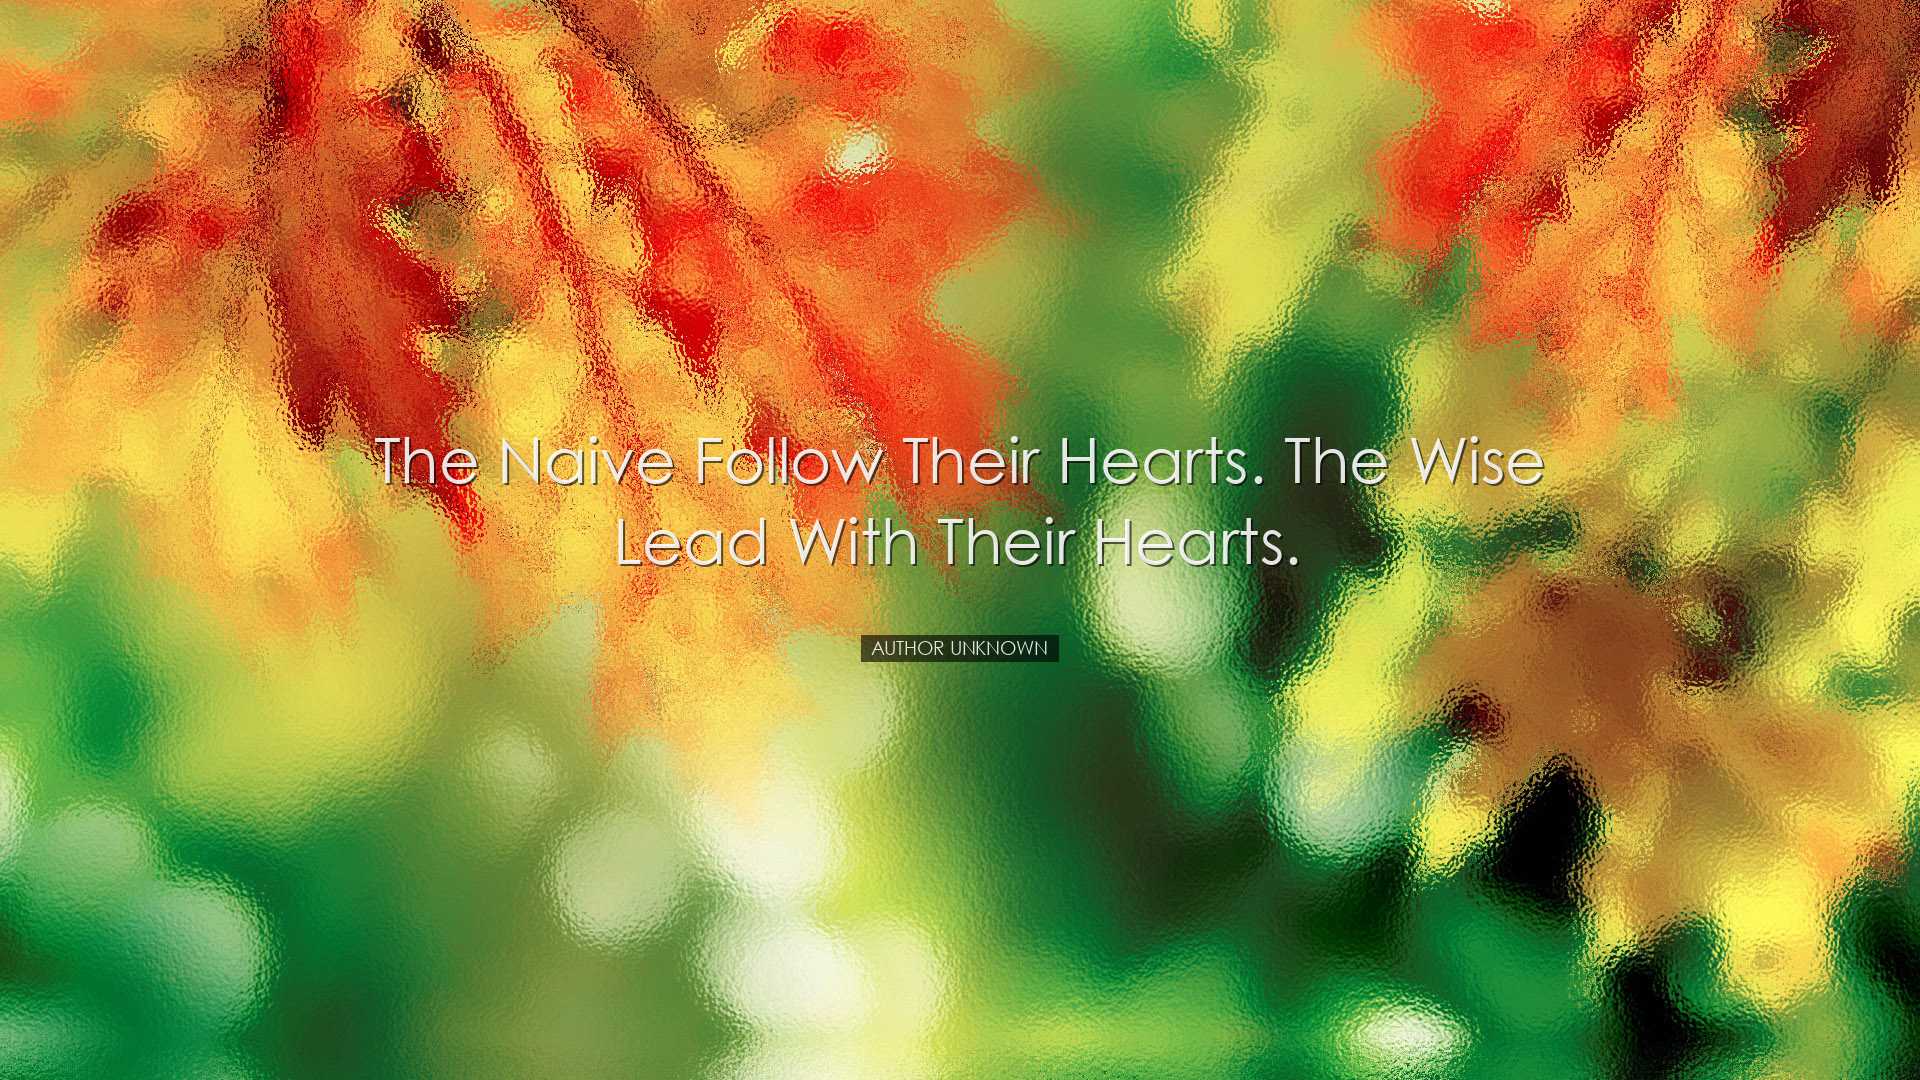 The naive follow their hearts. The wise lead with their hearts. -